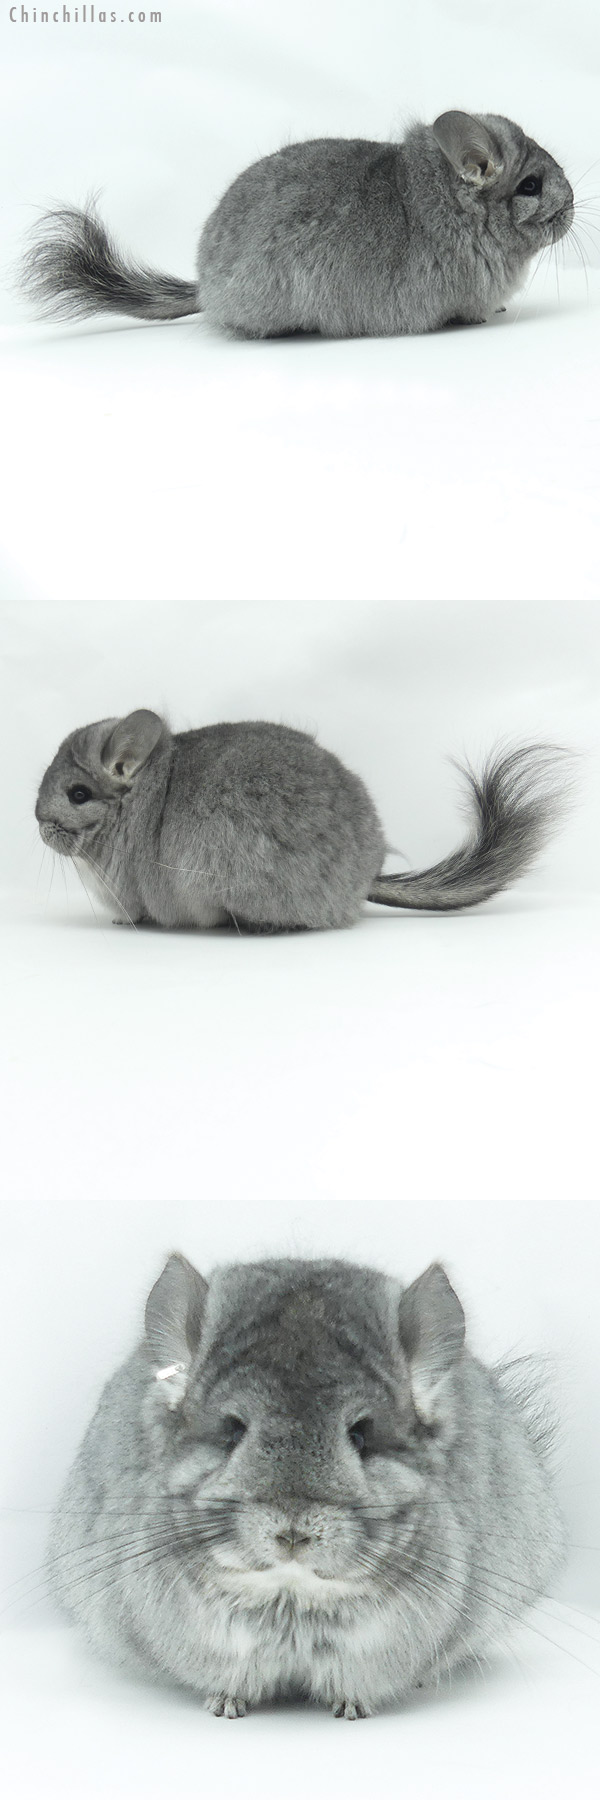 Chinchilla or related item offered for sale or export on Chinchillas.com - 20122 Exceptional Standard ( Sapphire Carrier )  Royal Persian Angora Female Chinchilla